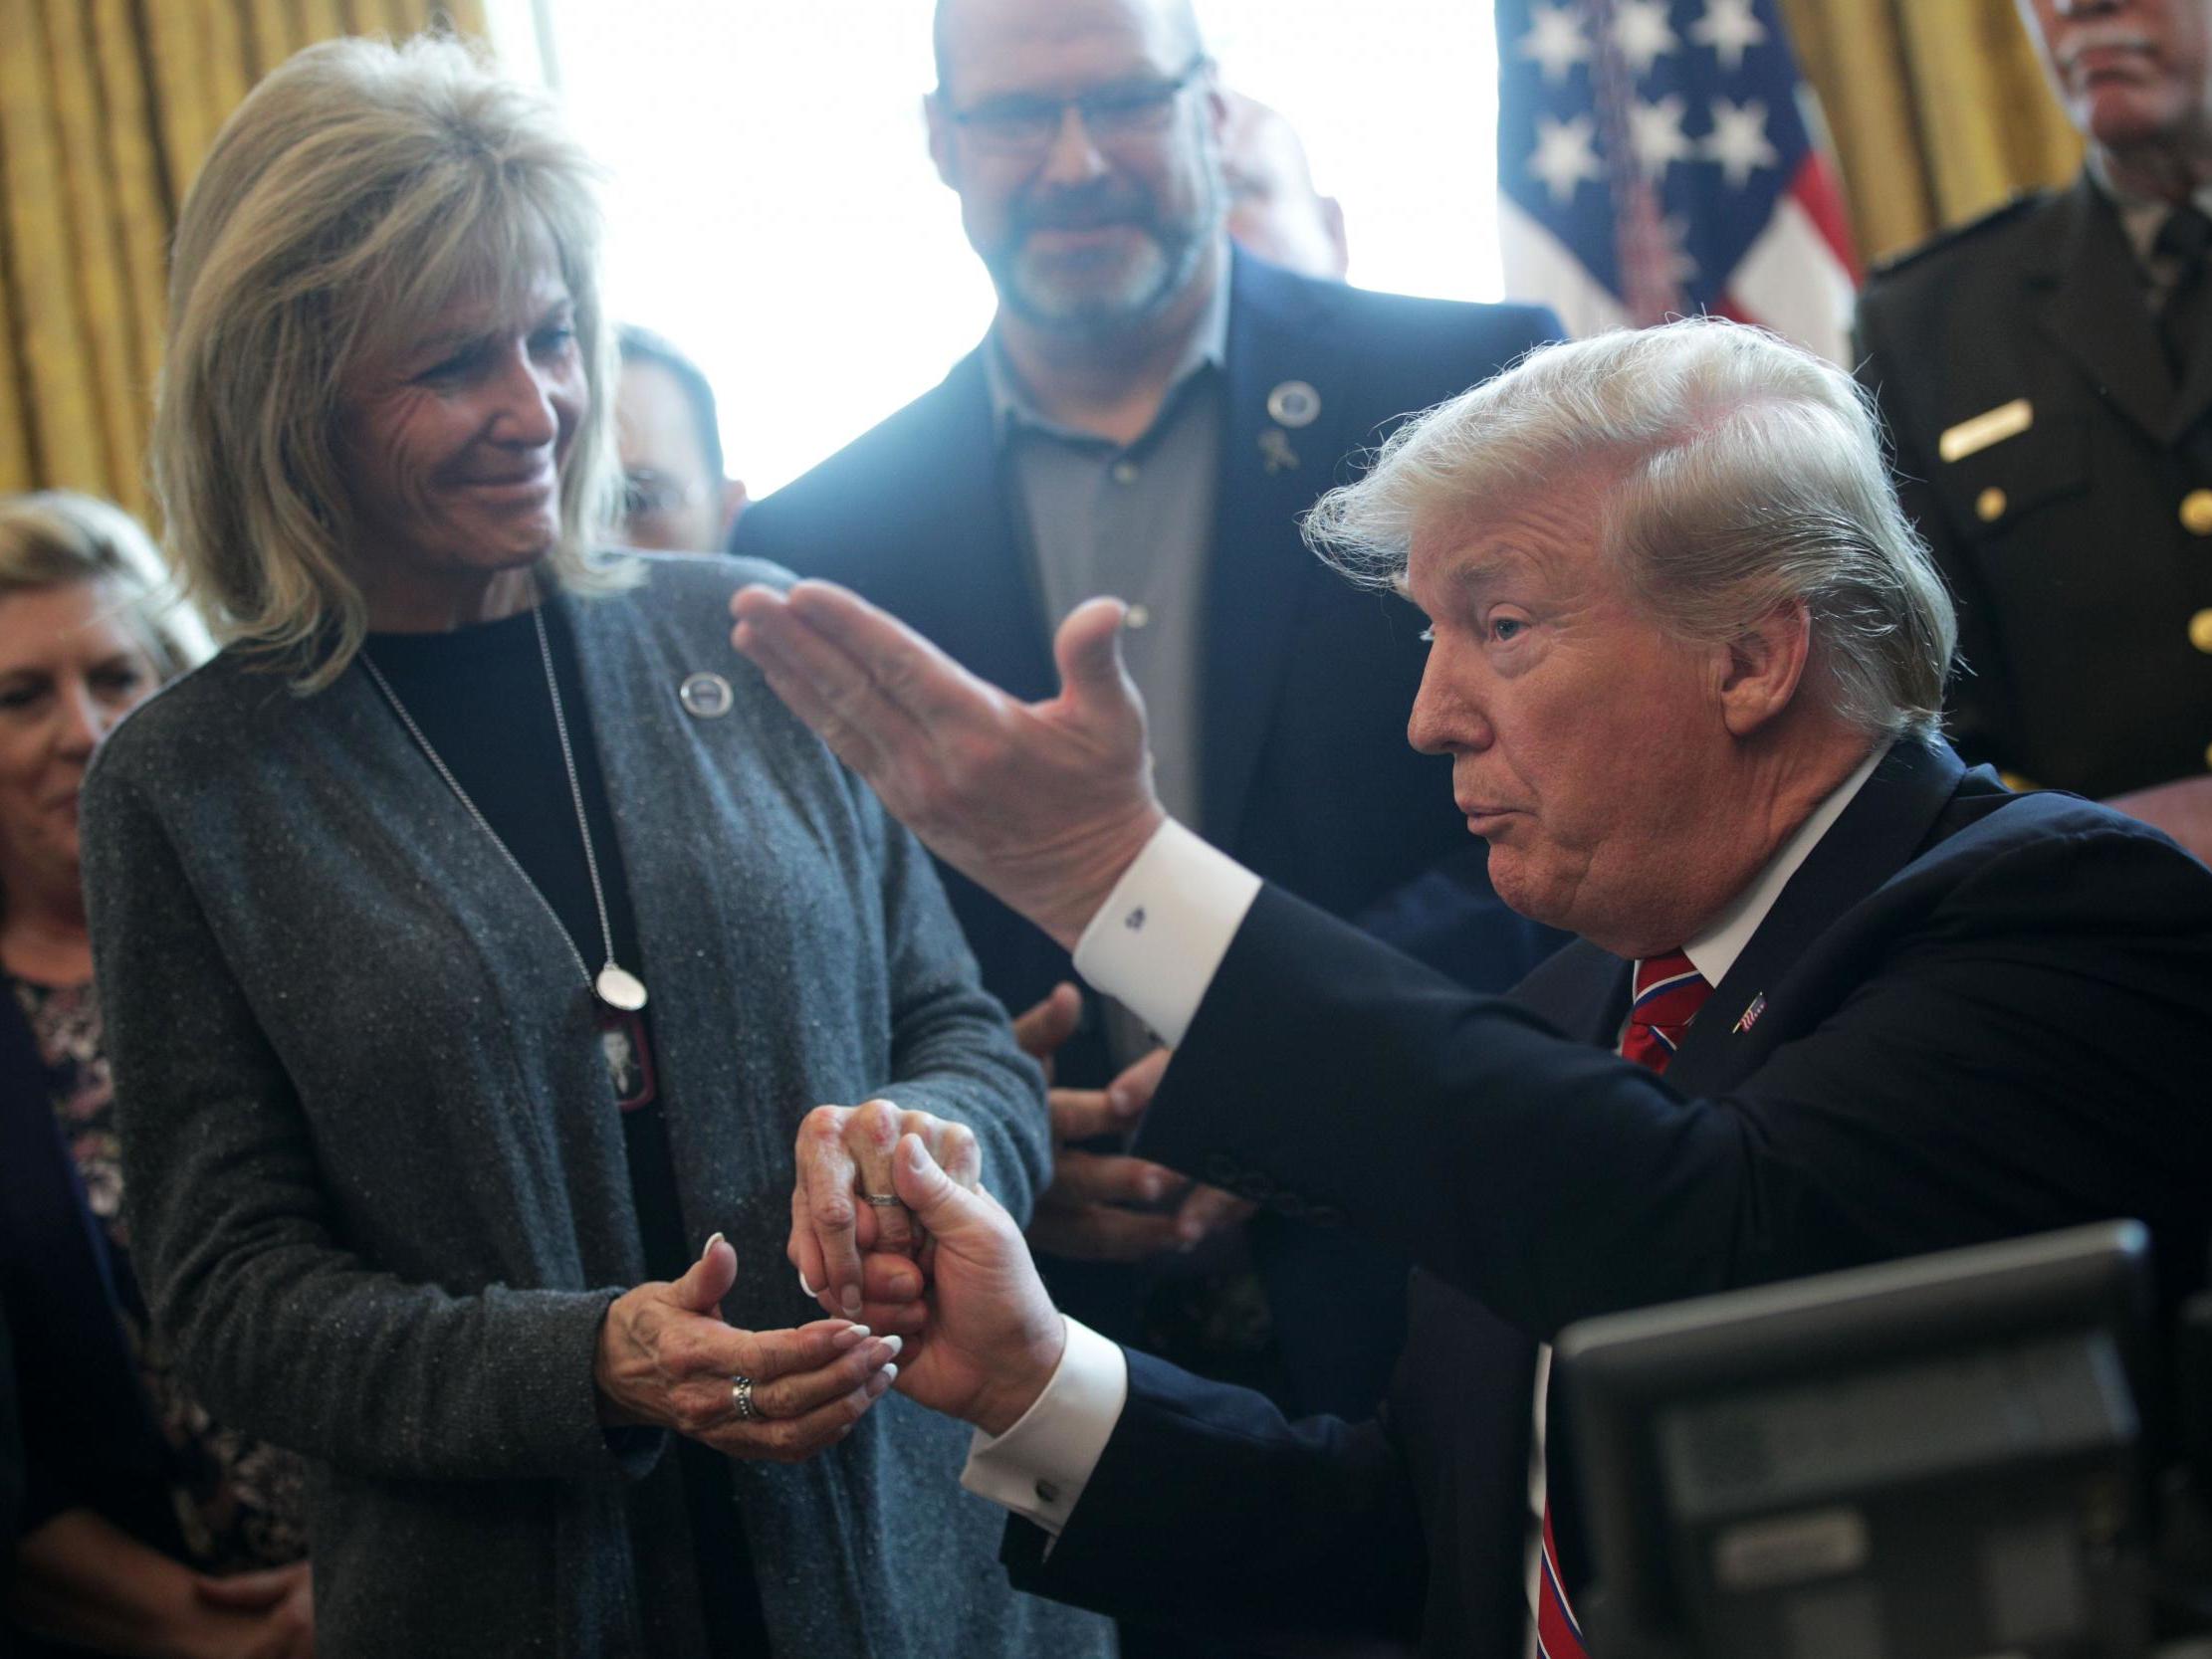 Mary Ann Mendoza spoke with Donald Trump during a White House meeting on border security in 2019.